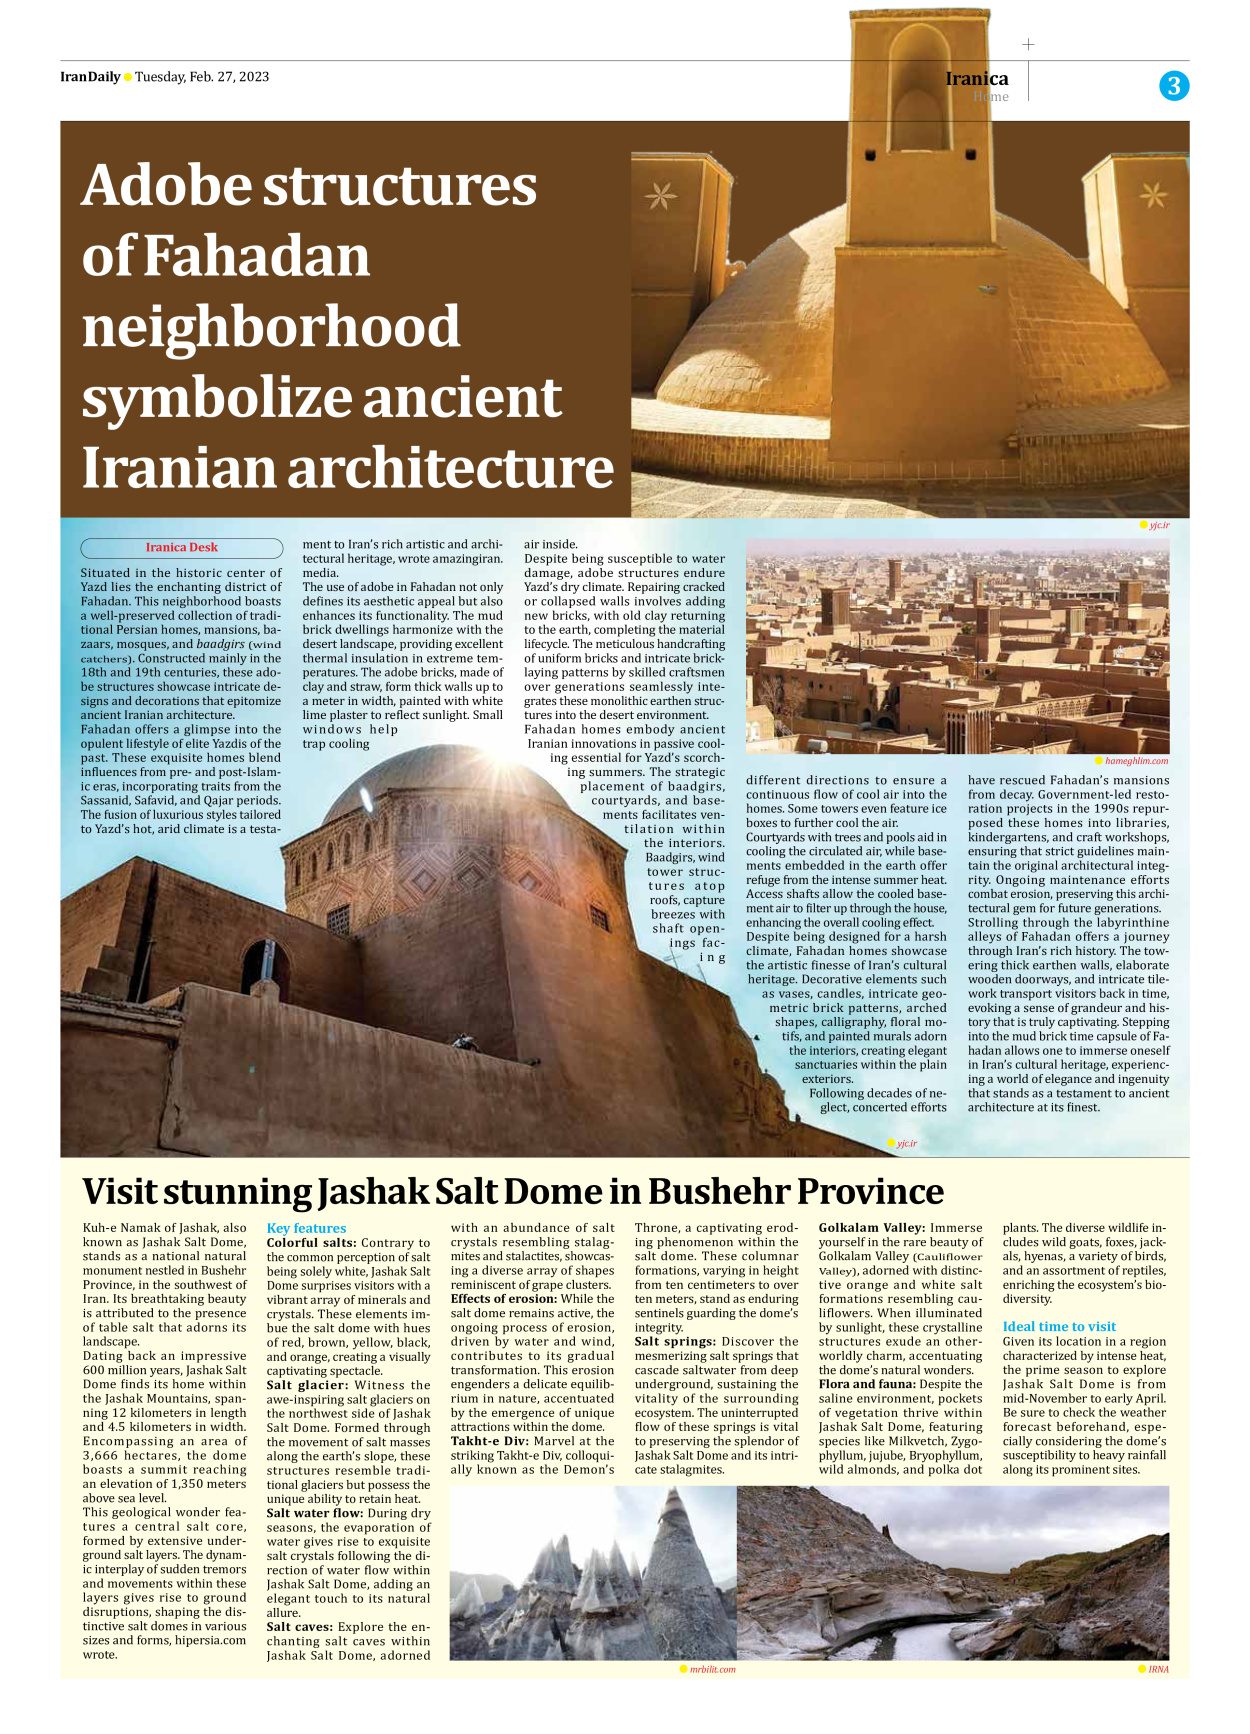 Iran Daily - Number Seven Thousand Five Hundred and Sixteen - 27 February 2024 - Page 3